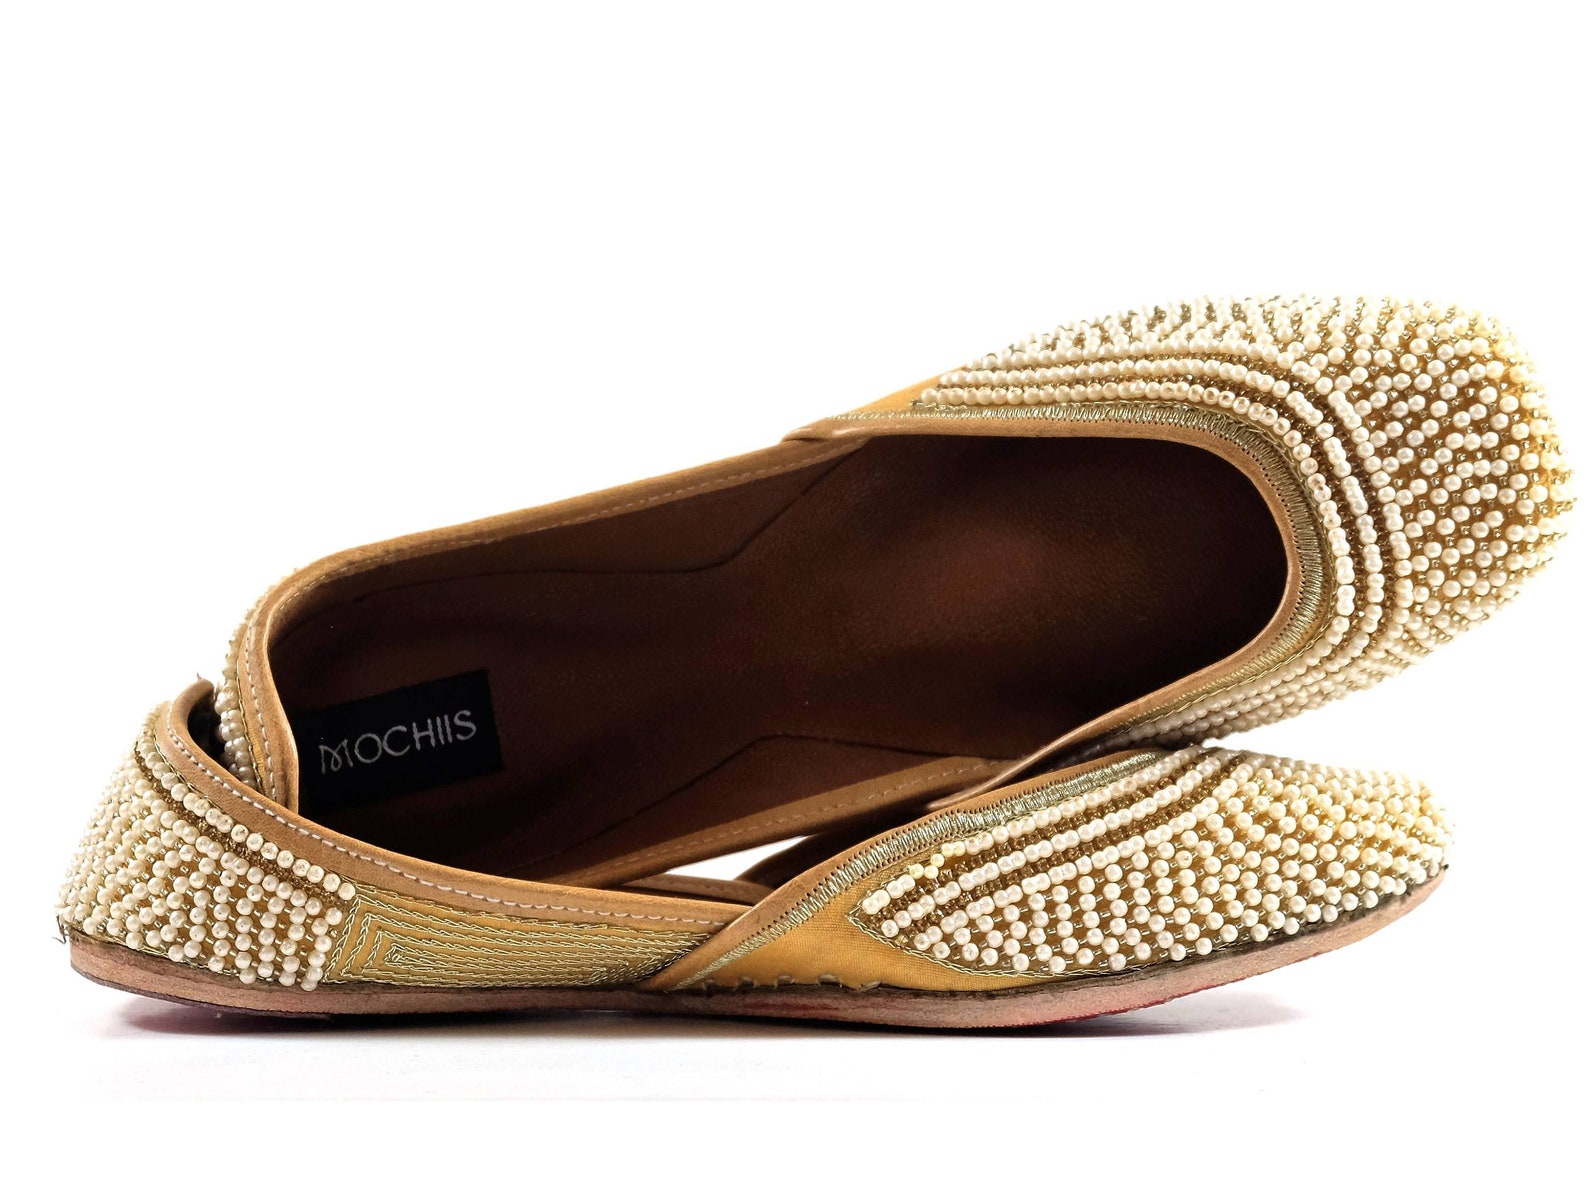 moti - handmade embroidered leather ballet flats - pearl juttis - traditional jutti / mojari / khussa with a contemporary twist